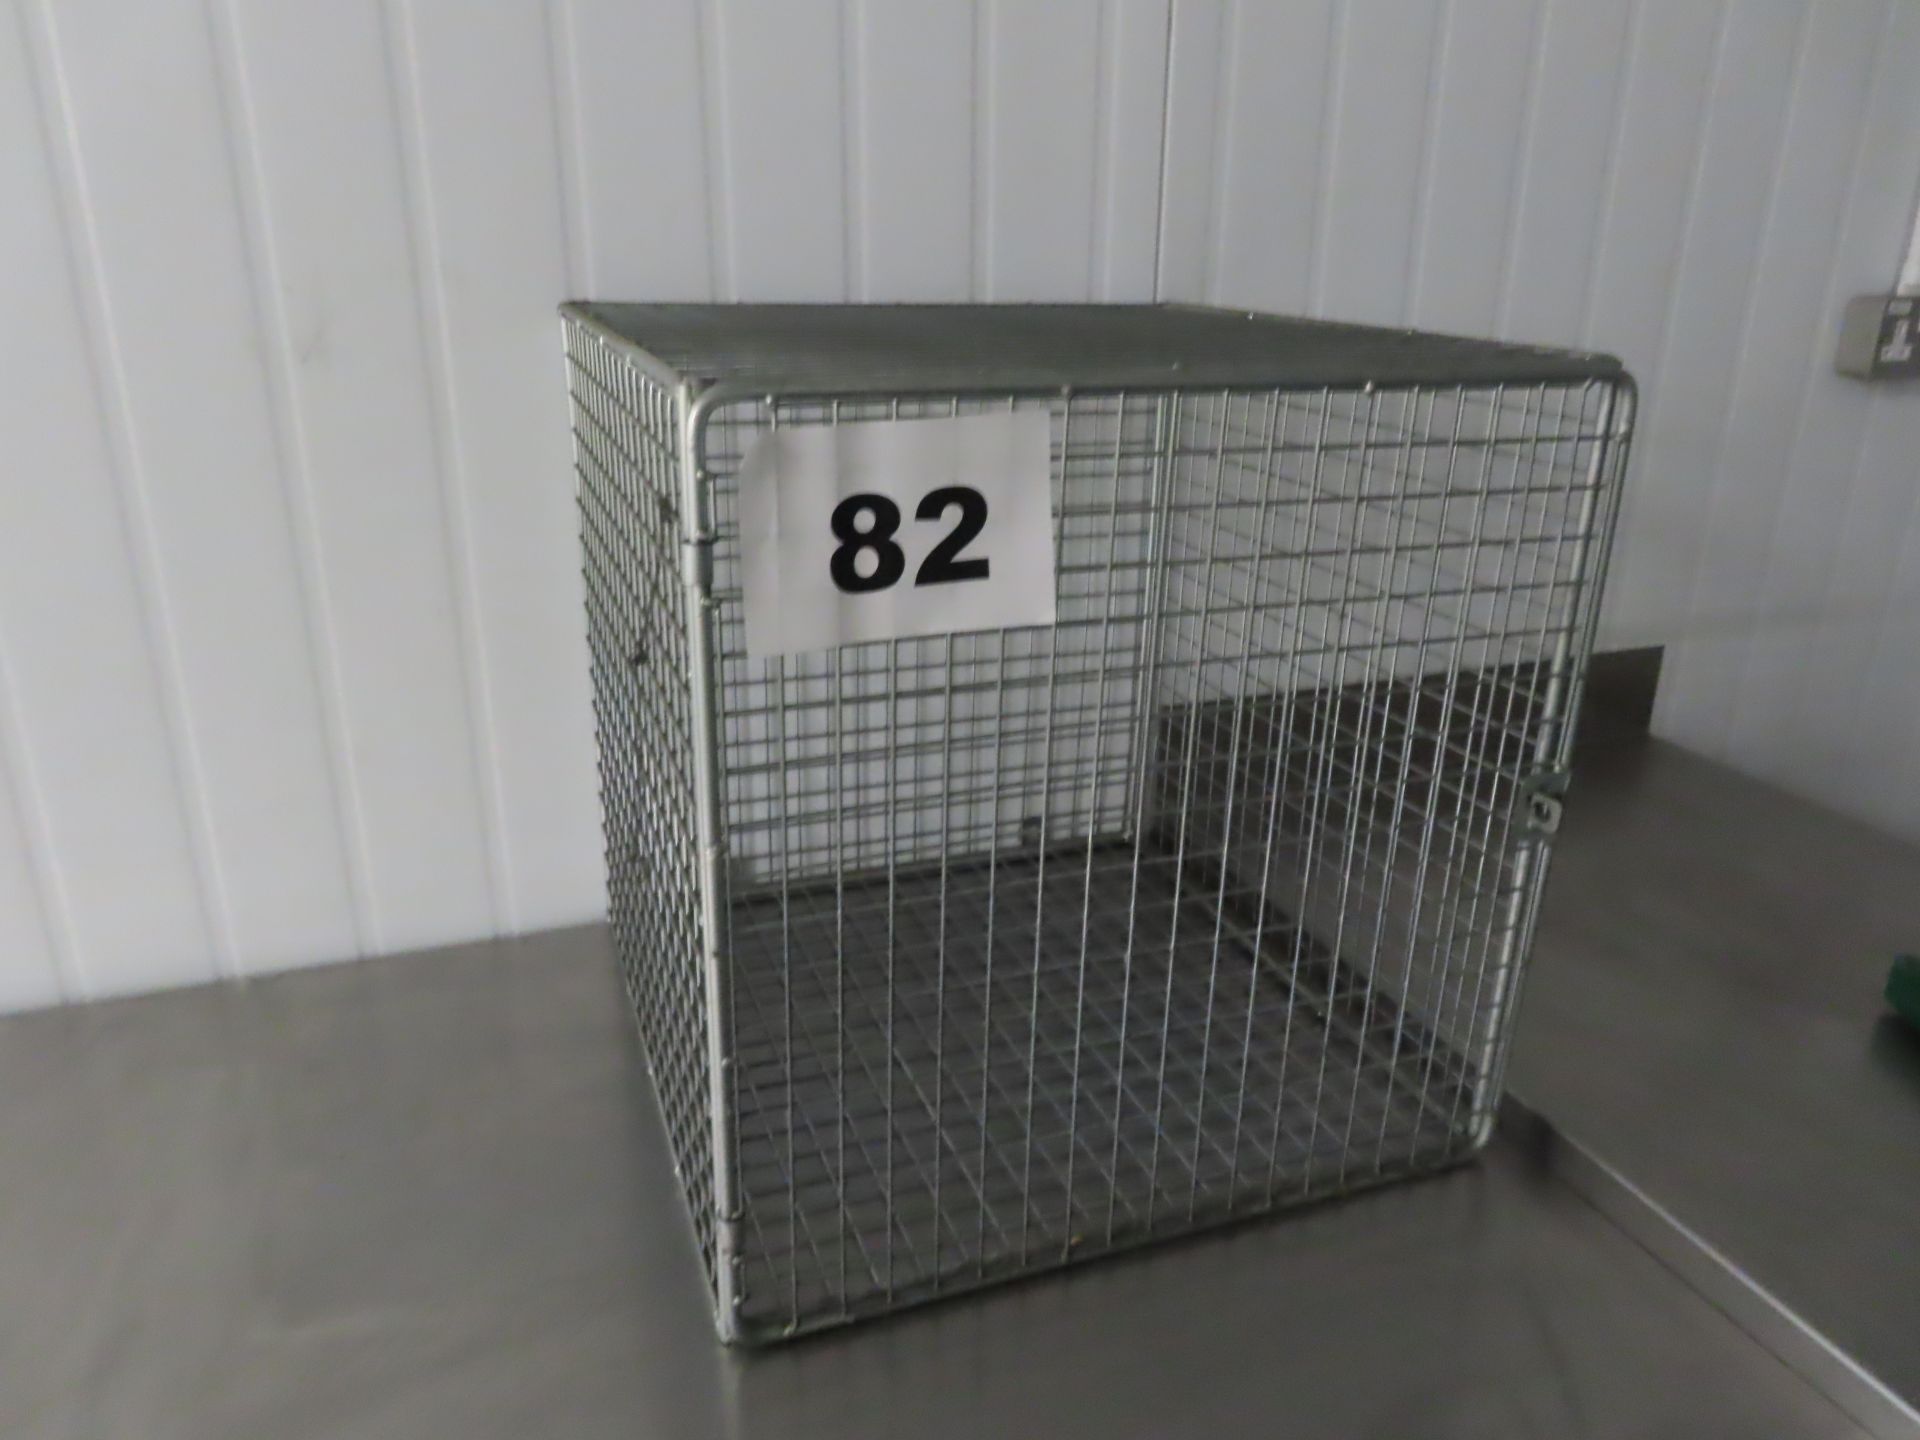 STAINLESS STEEL WALL MOUNTED CAGE.